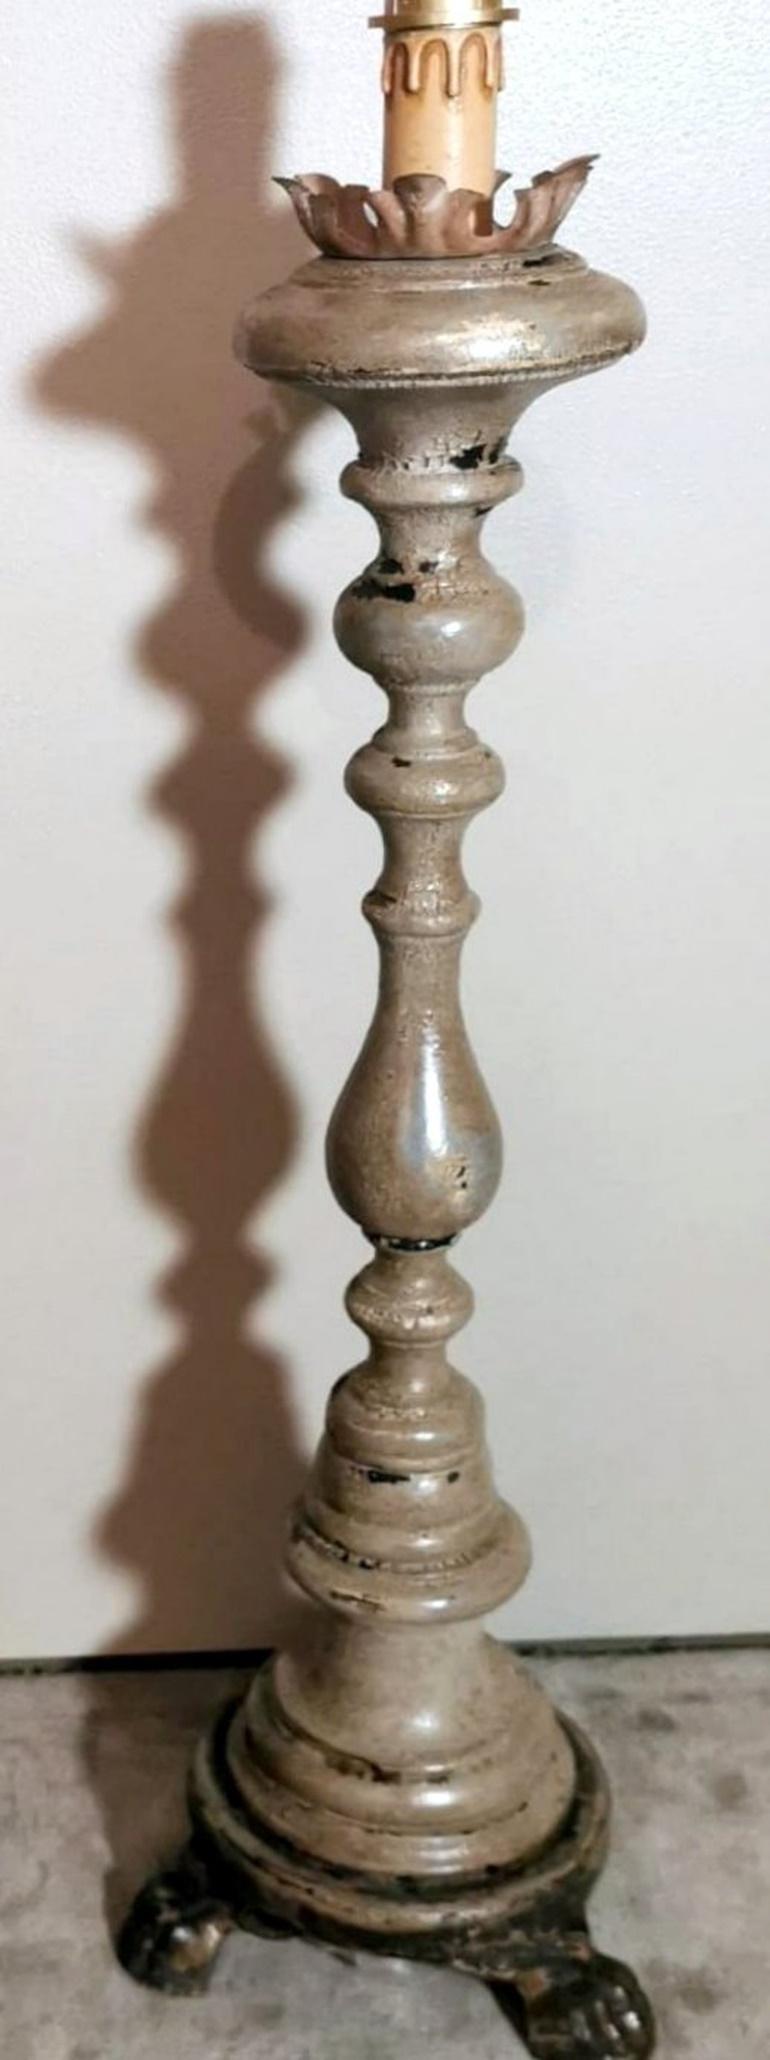 Hand-Crafted Italian Wooden Church Candlesticks in the Shape of a Torch Holder For Sale